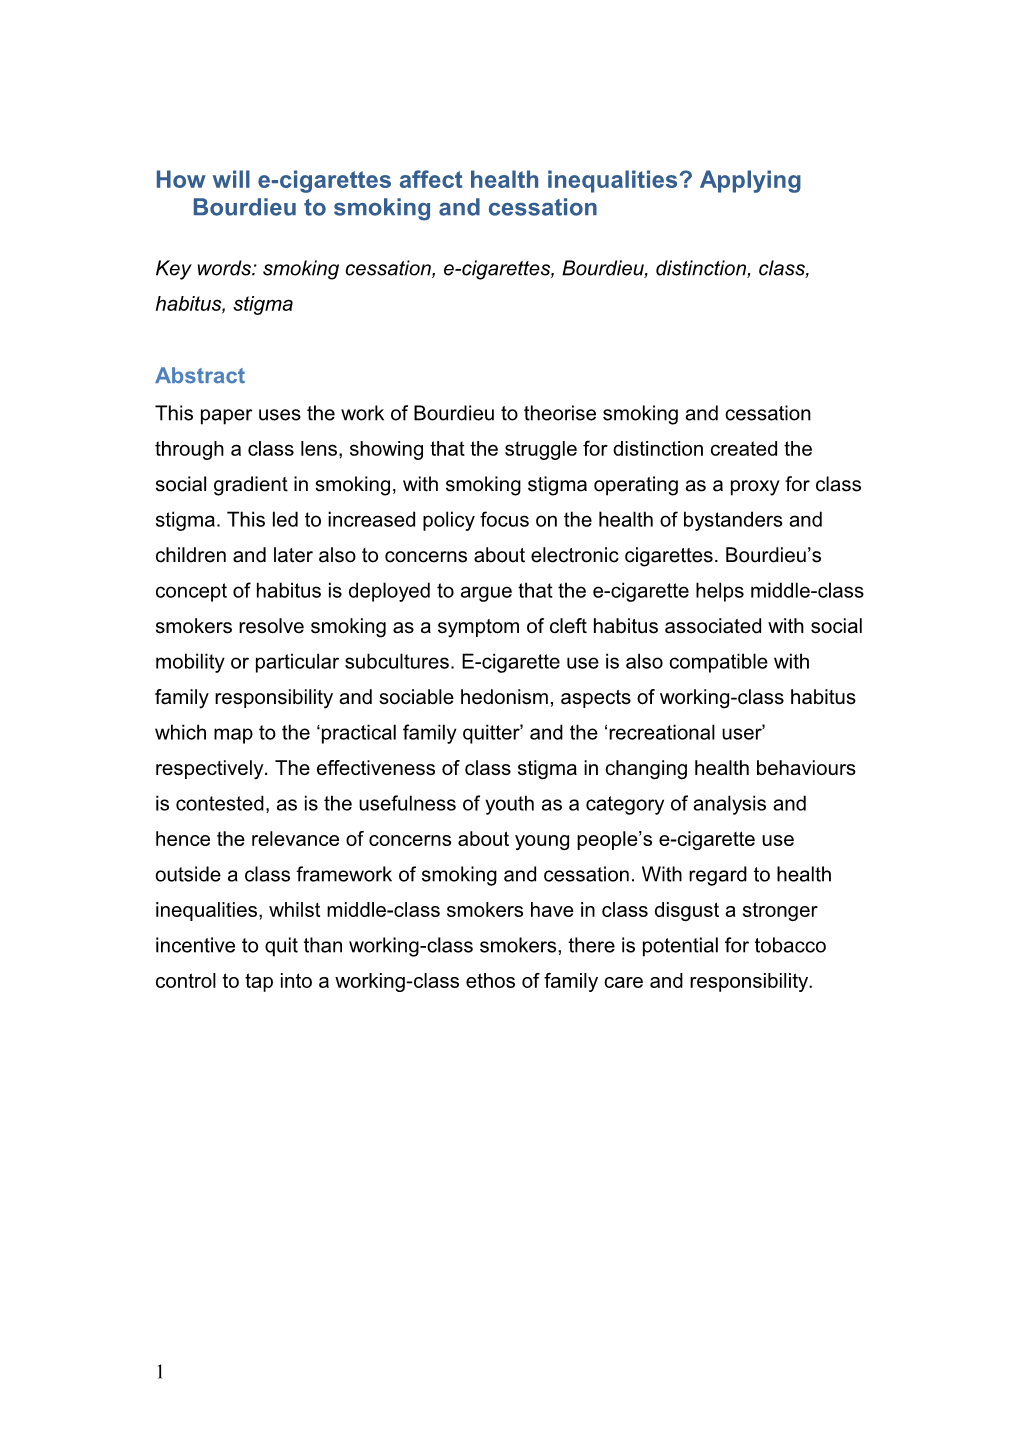 How Will E-Cigarettes Affect Health Inequalities? Applyingbourdieu to Smoking and Cessation